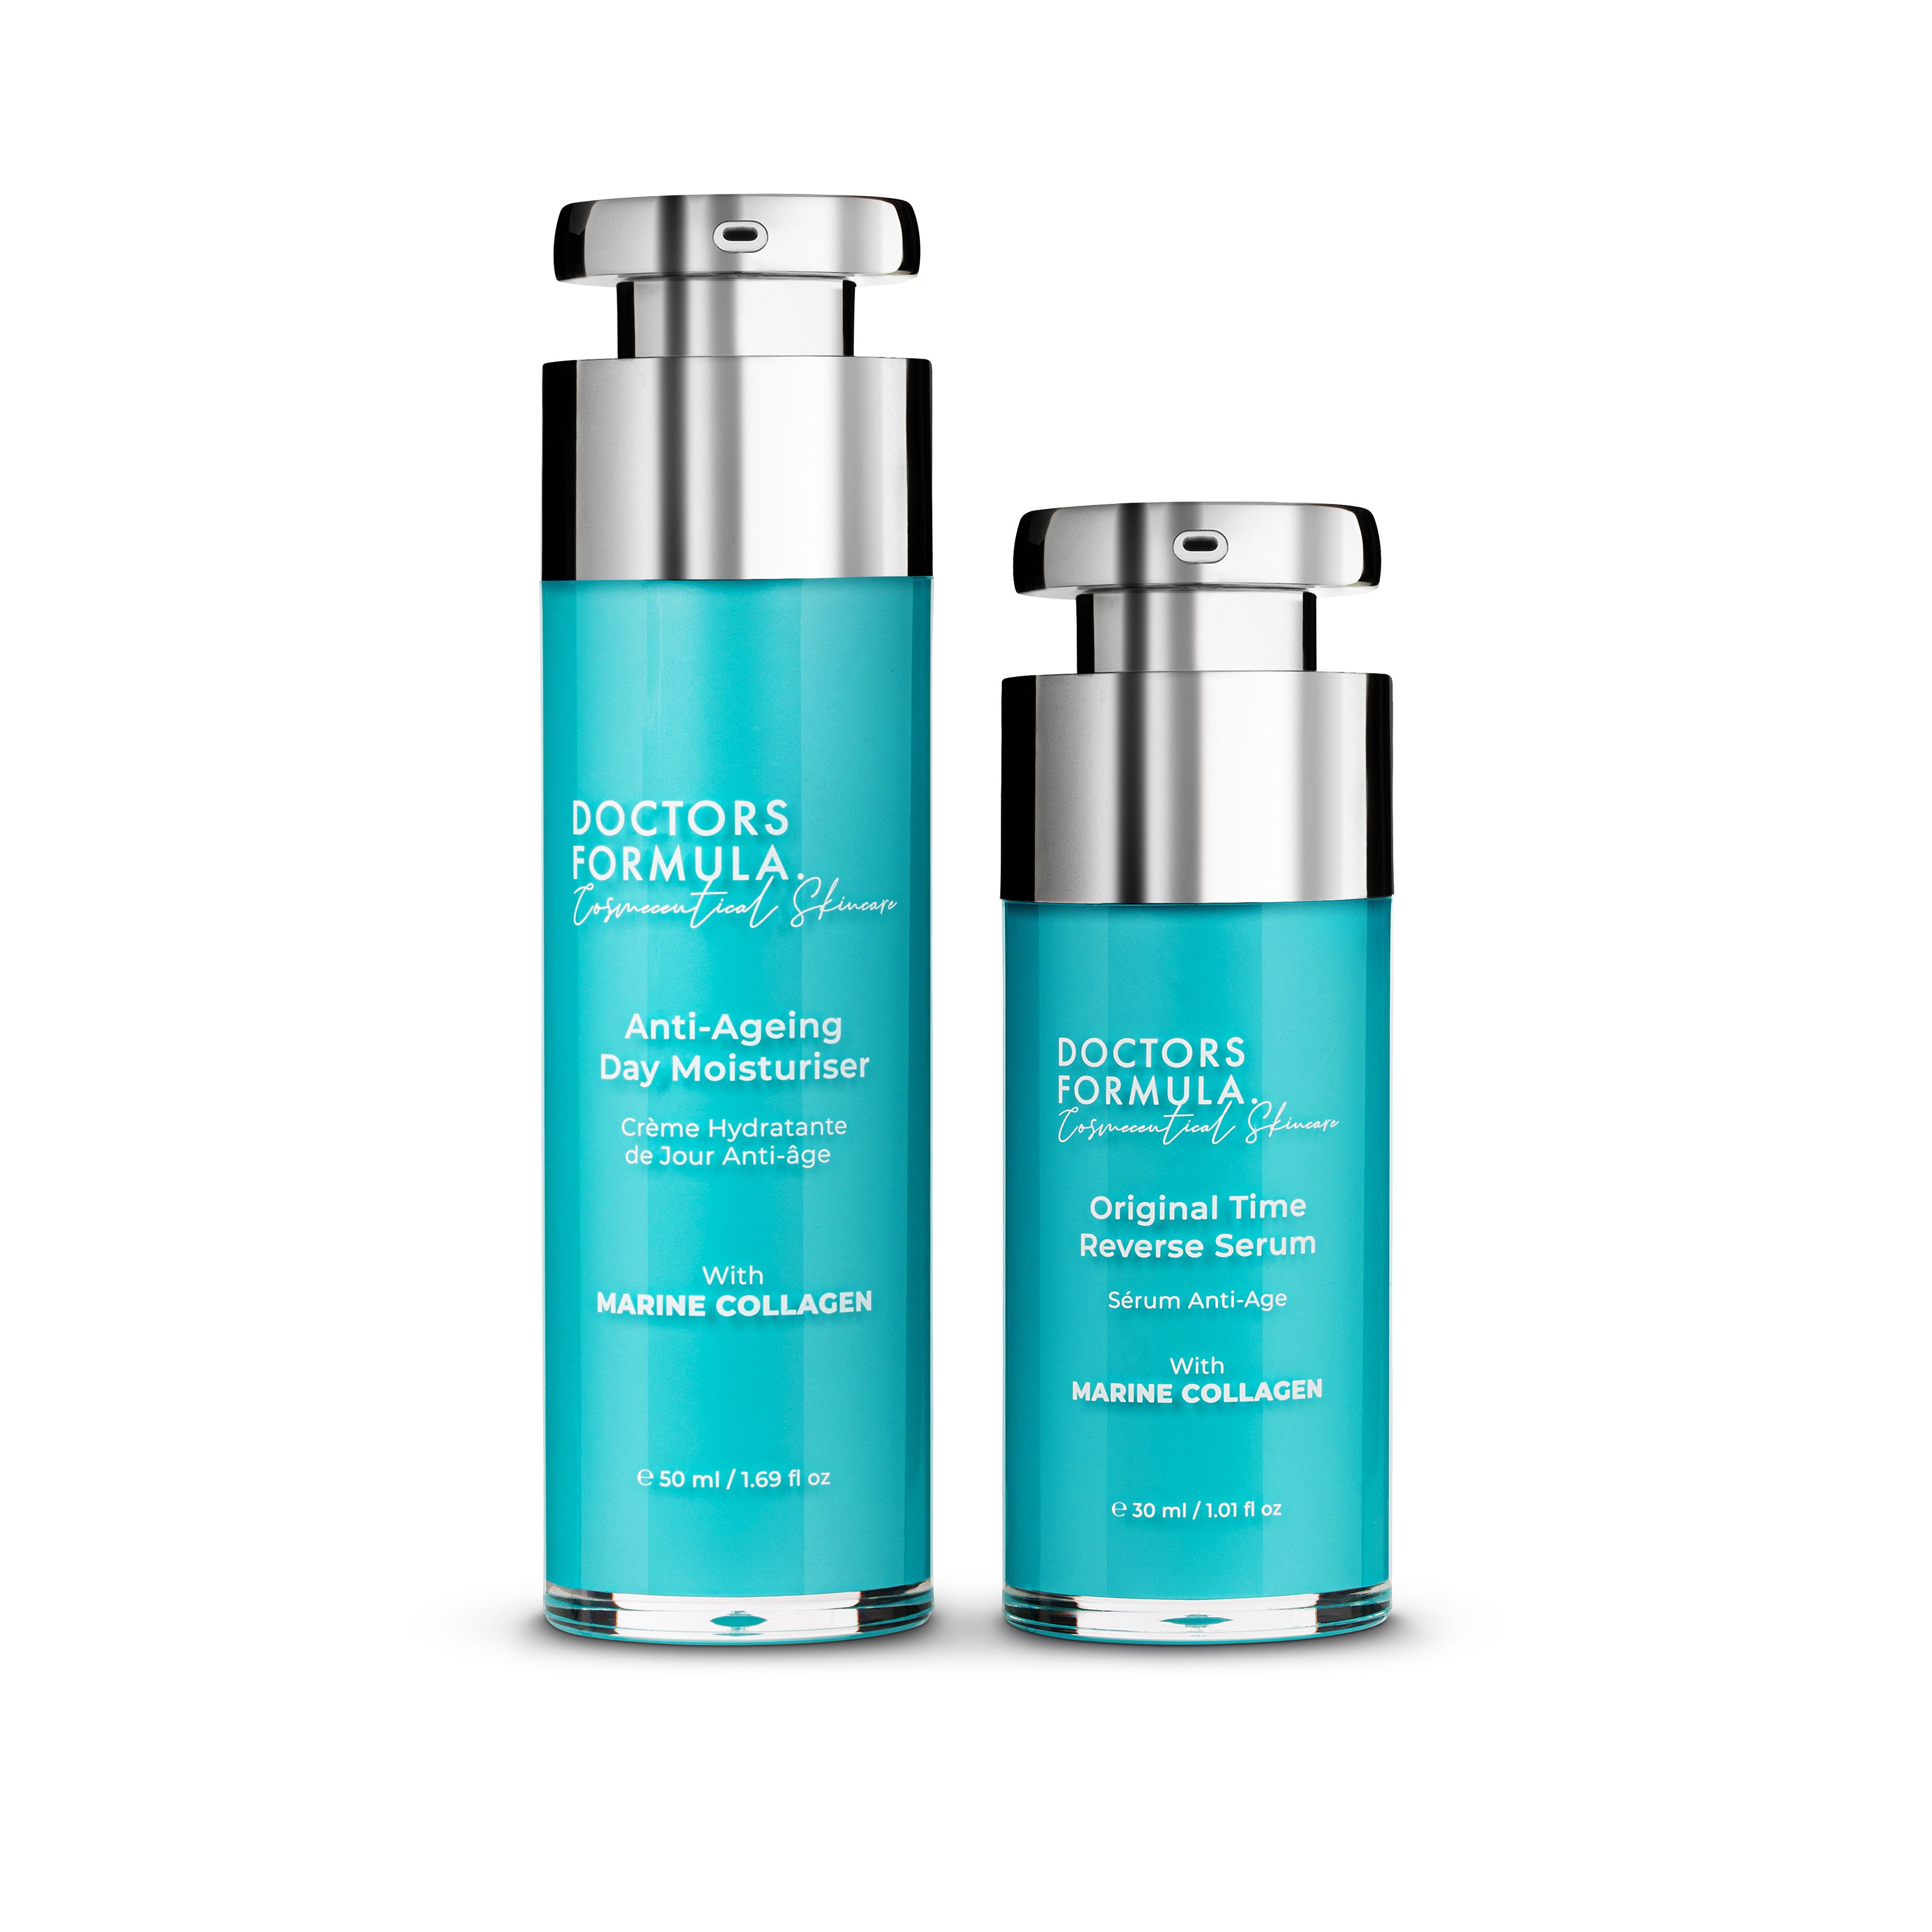 Our Marine Collagen range is predominantly focused on anti-ageing skincare. Our star ingredient, Marine Collagen Amino Acid, has numerous scientifically proven benefits on our skin.
It is the structural basis for healthy, youthful-looking skin as it supports our skin’s hydration, firmness and elasticity.

Marine Collagen peptides help renew skin’s ability to retain moisture and suppleness, while protecting itself from further damage resulting in loss of elasticity and firmness. Marine Collagen minimises the look of fine lines and wrinkles and therefore is the key ingredient behind our Anti-Ageing Range.

Composition of the Doctors Cosmeceutical Skincare Formula:
1 x Doctors Cosmeceutical Skincare Formula Original Time Reverse Serum 30ml. 
Our Original Time Reverse Serum is a unique blend of active ingredients such as Collagen Amino Acids, Soluble Collagen and Algae extract. Specially formulated to boost the skin firmness, plumpness and hydration for youthful looking skin.
Key Ingredients:
The Marine collagen amino acids hydrate the skin, working to prevent water loss and improve the suppleness of the skin.
The soluble collagen balances, nourishes and moisturises the skin.
The Algae extract brightens and smoothen the skin for a more even skin tone.
Usage:
Apply every morning and evening after cleansing.
100% Cruelty Free.
Ingredients: 
Aqua (Water), Carbomer, Glycerin, Benzyl Alcohol, Allantoin, PEG-7, Glyceryl Cocoate, Phenoxyethanol, Sodium Hydroxide, Disoudium EDTA, Dehydroaccetic Acid, Ethylhexylglycerin, Collagen Amino Acids, Parfum (Fragrance), Algae Extract, Soluable Collagen, Benzyl Salicylate, Sodium Benzoate, Potassium Sorbate, Hexyl Cinnamal, Aloe Barbadenisis Leaf Juice Powder, Limonene.

1 x Doctors Cosmeceutical Skincare Formula Marine Collagen Anti-Ageing Day Moisturiser 50ml.
Our Anti-Ageing Day Moisturiser is specially formulated to nourish and moisturise the skin. This day moisturiser also contains Collagen Amino Acids and Soluble Collagen to boost the skin’s firmness, plumpness and hydration.
Key Ingredients:
The Marine collagen amino acids used to hydrate the skin, working to prevent water loss and improve the suppleness of the skin.
The Soluble Collagen balances, nourishes and moisturises the skin.
The Complex of marine extracts hydrates the skin and boosts skin's barrier.
Usage:
Apply in the morning after the serum.
100% Cruelty Free.
Ingredients:
Aqua (Water), Glycerin, Glyceryl Stearte SE, Ceterryl Alcohol, Stearic Acid, Cocos Nucifera (Coconut Oil), Benzyl Alcohol, Isoceteth-20, Phenoxyethanol, Carbomer, Collagen Amino Acids, Allantoin, PEG-7, Glyceryl Cocoate, Disodium EDTA, Ethylhexylglycerin, Dehydroaccetic Acid, Sodium Hydroxide, Parfum (Fragrance), Soluable Collagen, Benzyl Salicylate, Gardenia Tahetenis, (Tiare Flower) Extract, Hydrolyzed Algin, Hexyl Cinnamal, Potassium Sorbate, Maris Aqua, Limonene, Chlorella Vulgaris Extract, Aloe Barbadenisis Leaf Juice Powder.